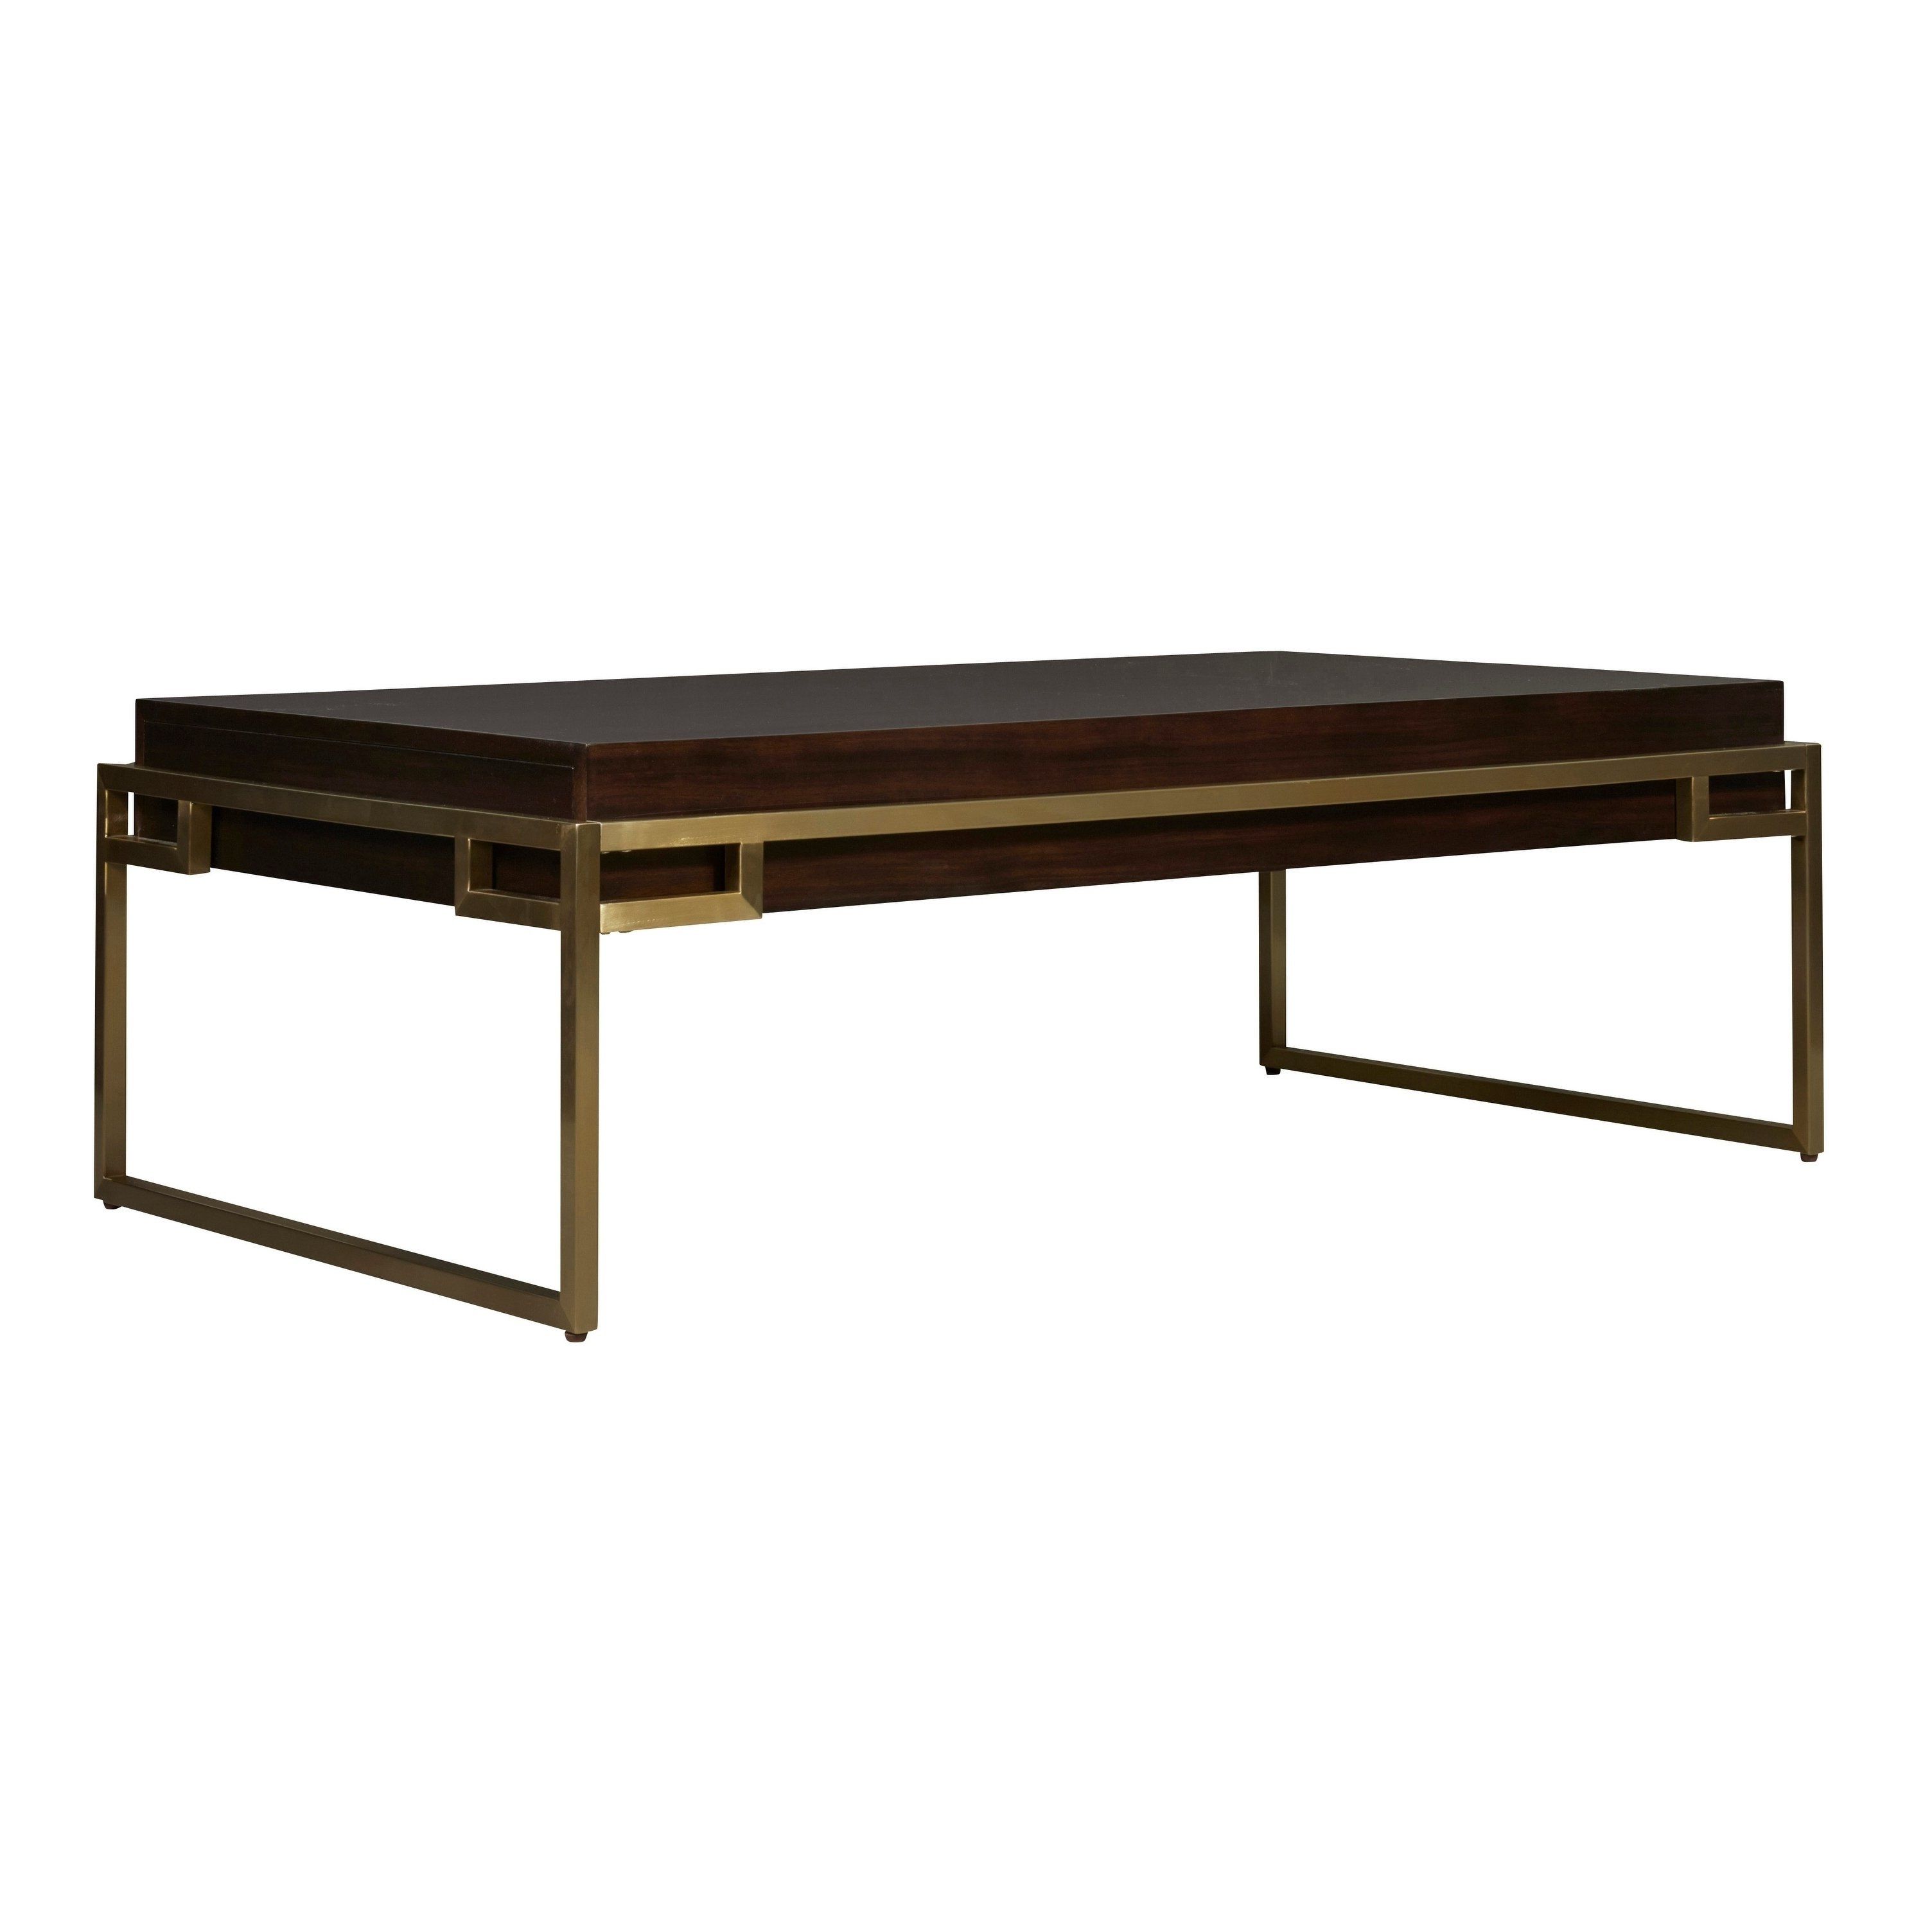 Favorite Rectangular Coffee Tables With Brass Legs Regarding Shop Modern Brushed Brass And Mahogany Rectangle Hayworth Cocktail (View 12 of 20)